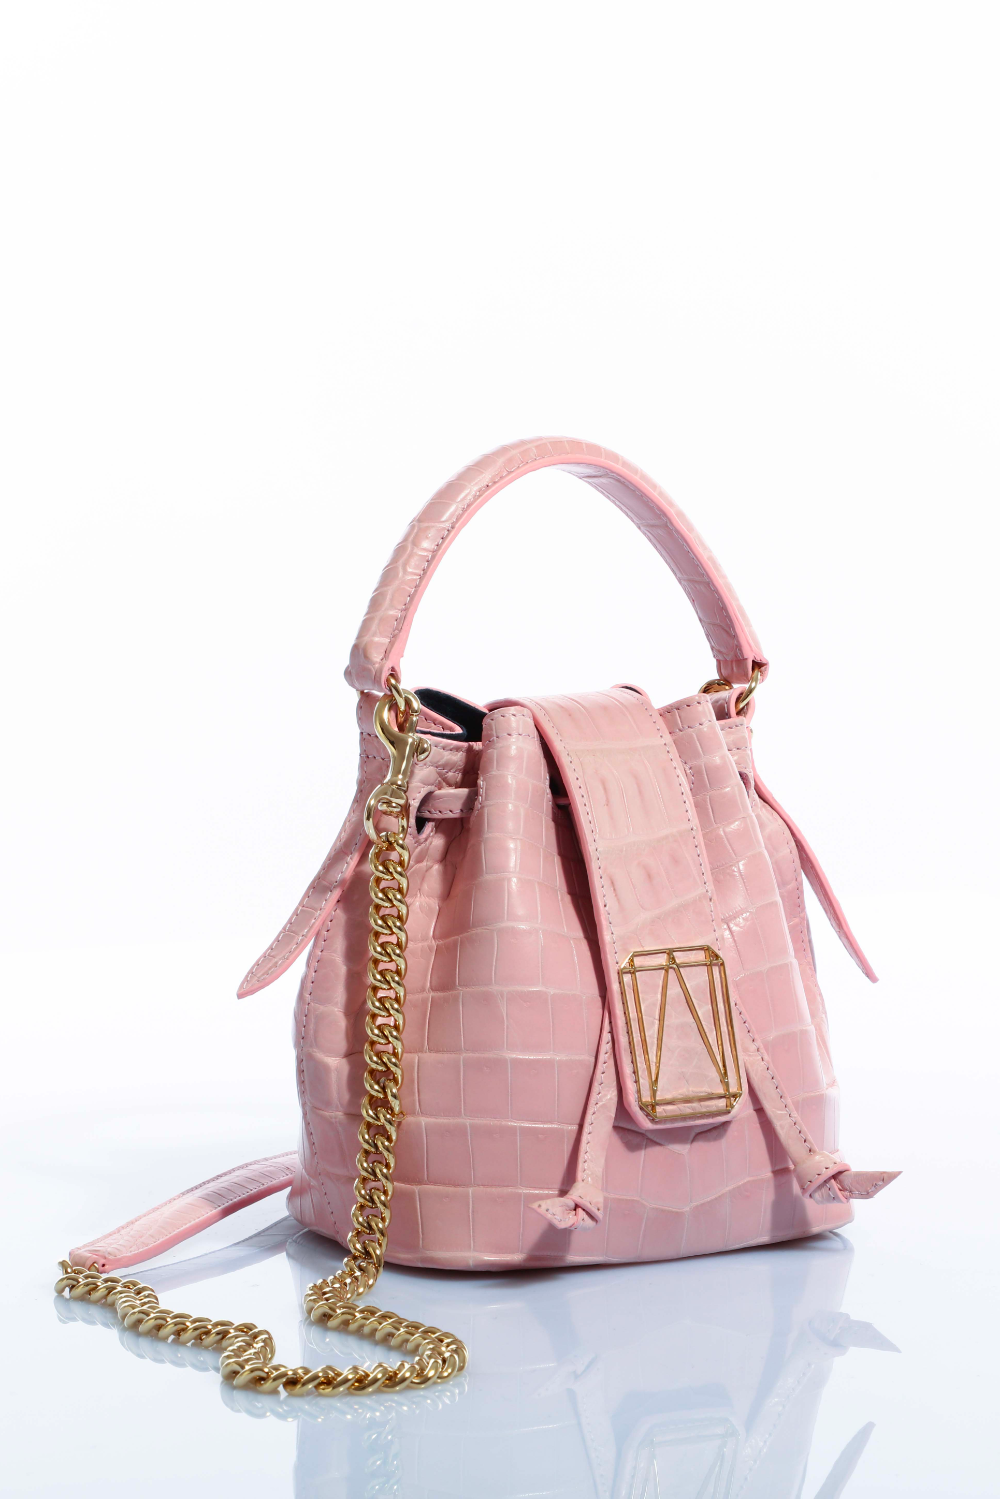 Pink leather handbag with gold chain strap on white background